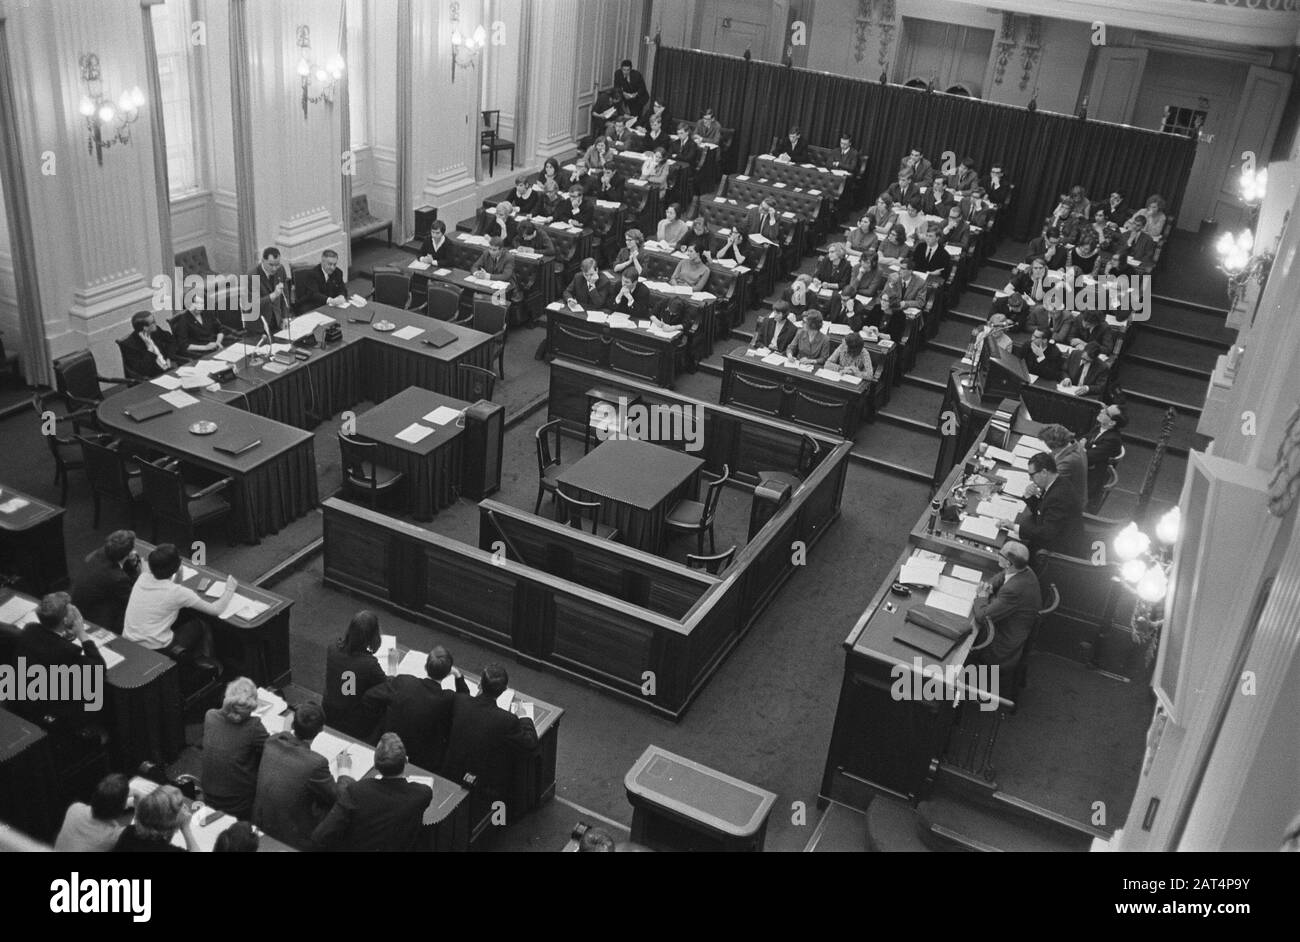 Youth Parliament In House Data: 12 Aprile 1966 Località: Den Haag, Zuid-Holland Foto Stock